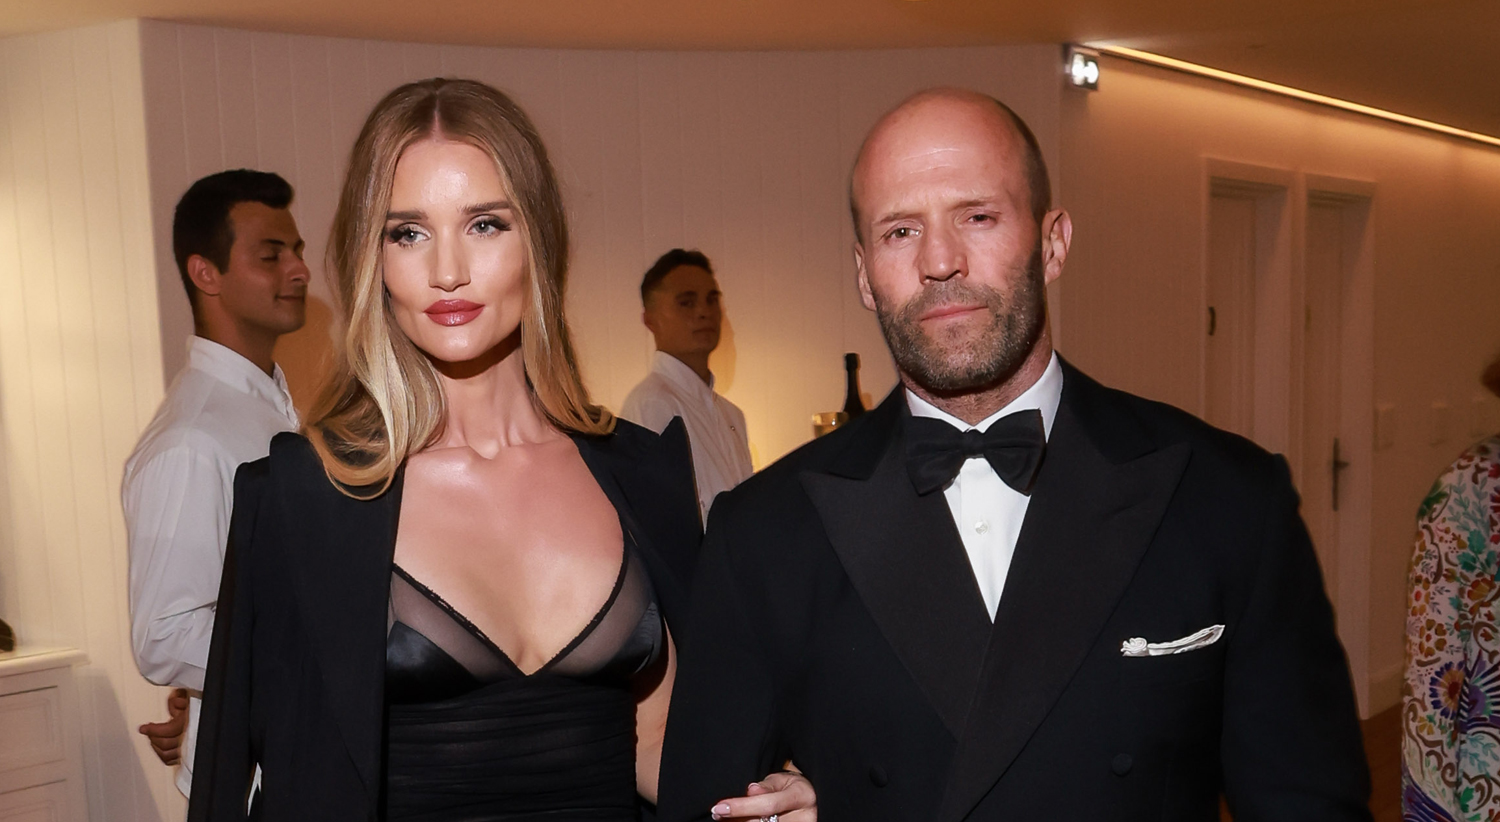 Jason Statham and Rosie Huntington-Whiteley at an event